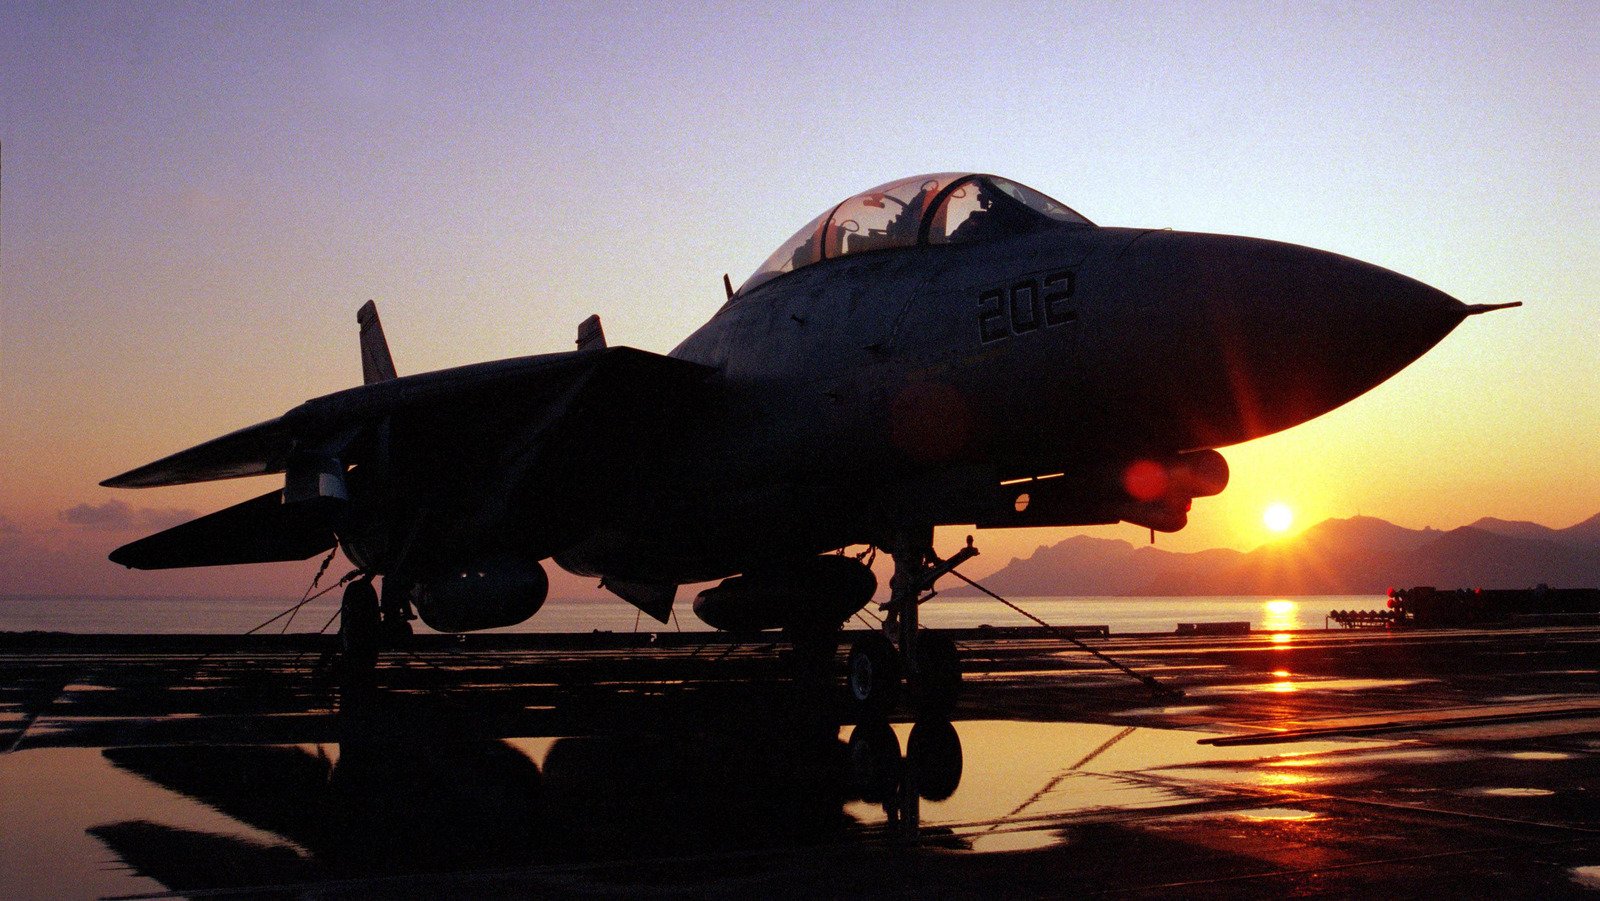 Every Fighter Jet Featured In Top Gun, Ranked Worst To Best